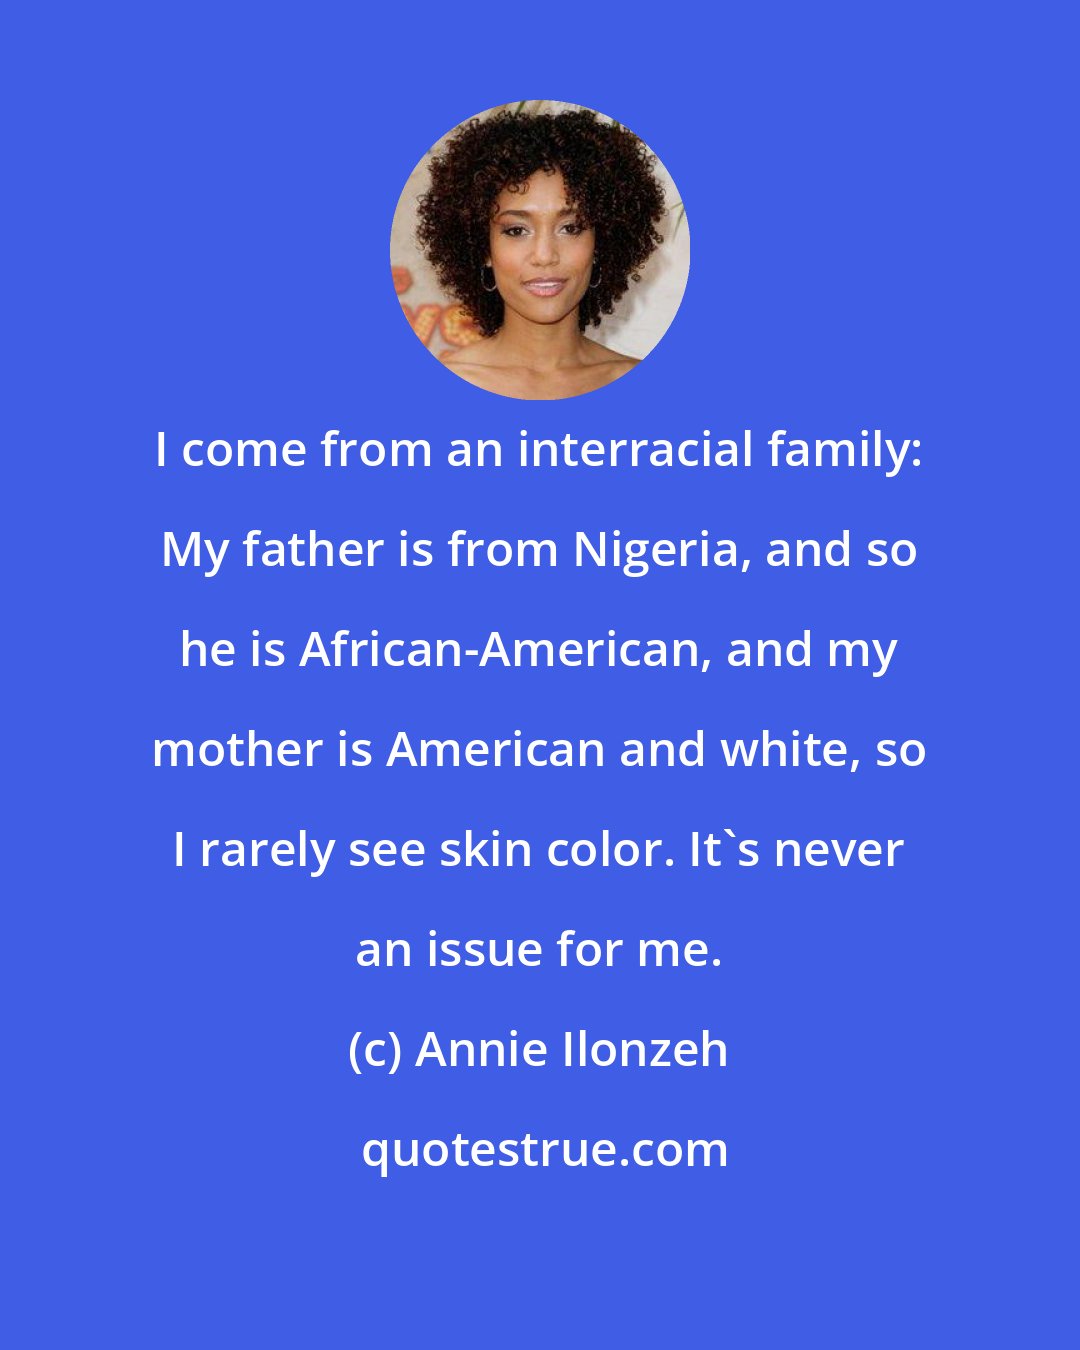 Annie Ilonzeh: I come from an interracial family: My father is from Nigeria, and so he is African-American, and my mother is American and white, so I rarely see skin color. It's never an issue for me.